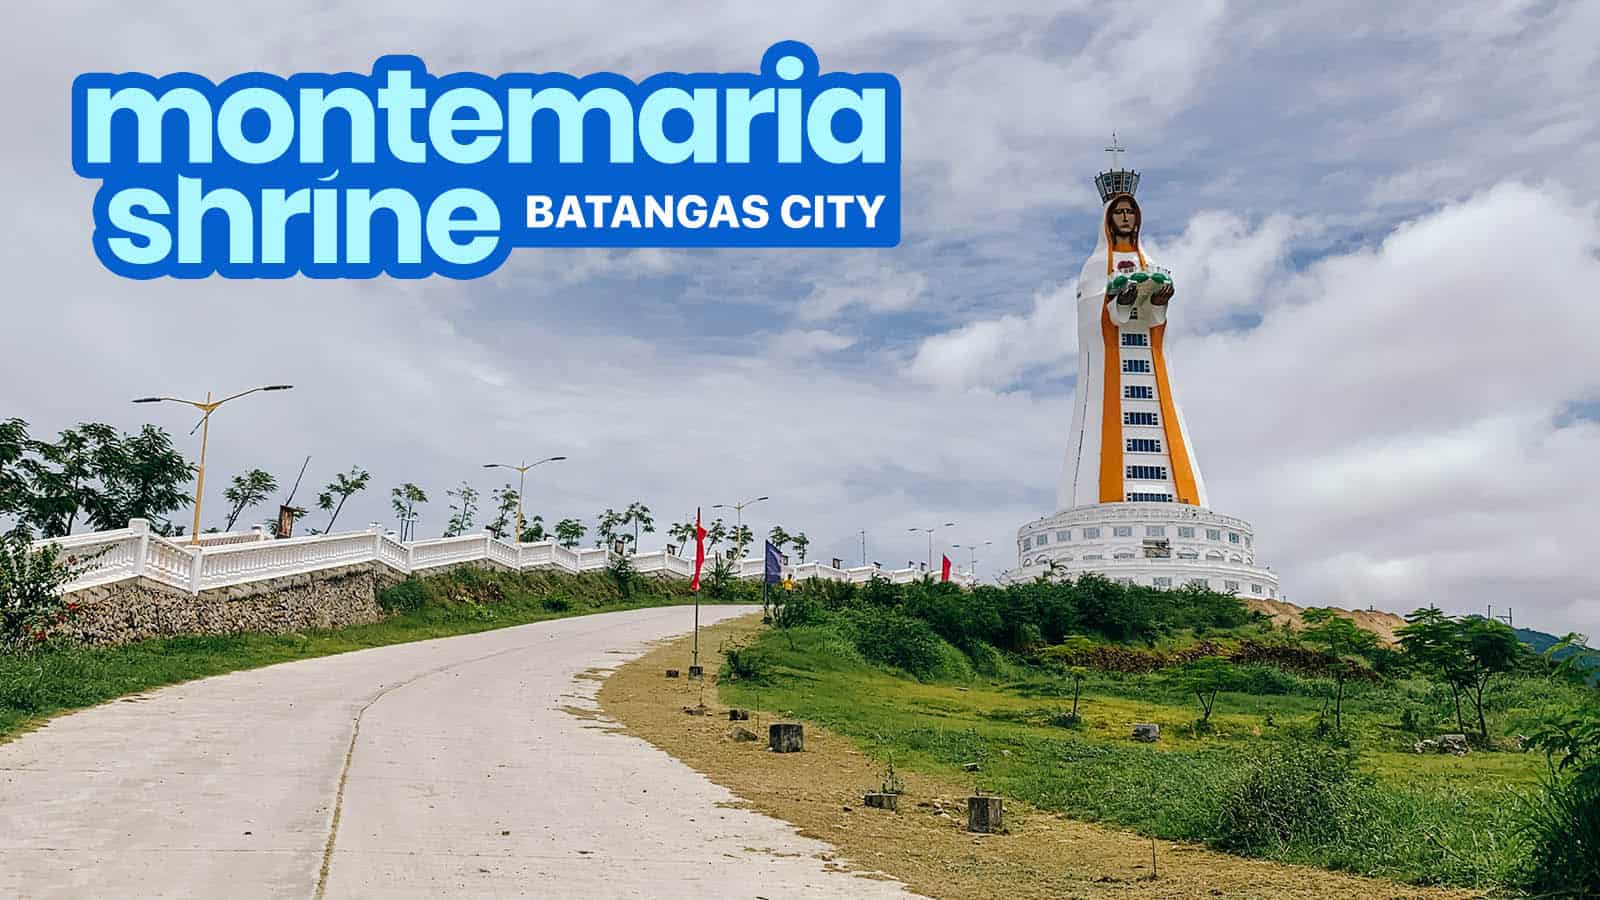 MONTEMARIA SHRINE, BATANGAS: Travel Guide & How to Get There